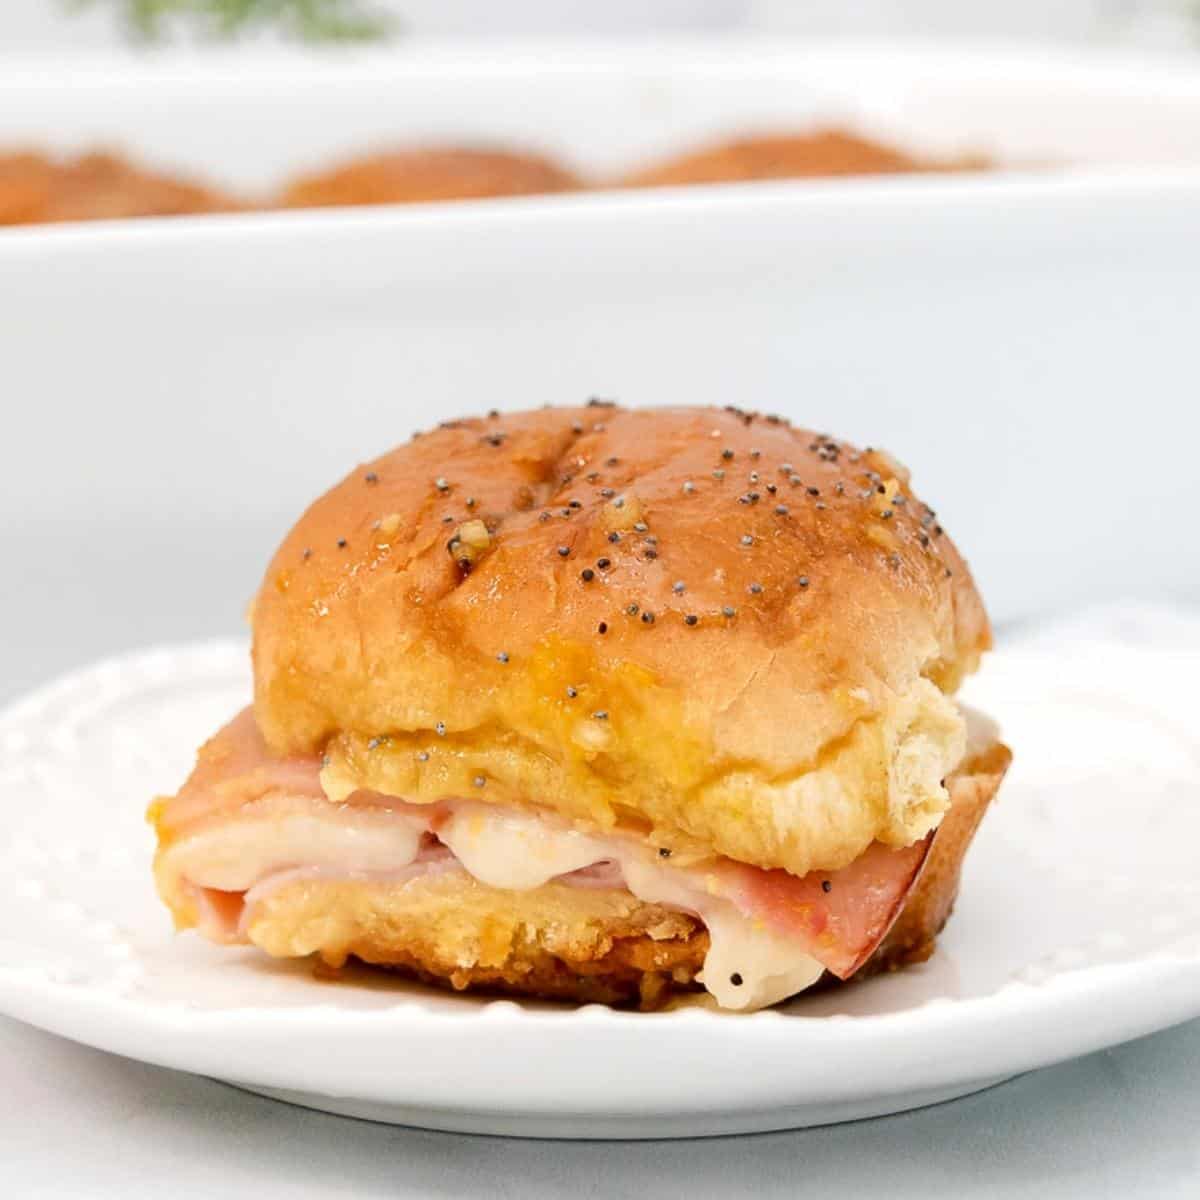 Featured image of baked sliders with cheese and deli meat.